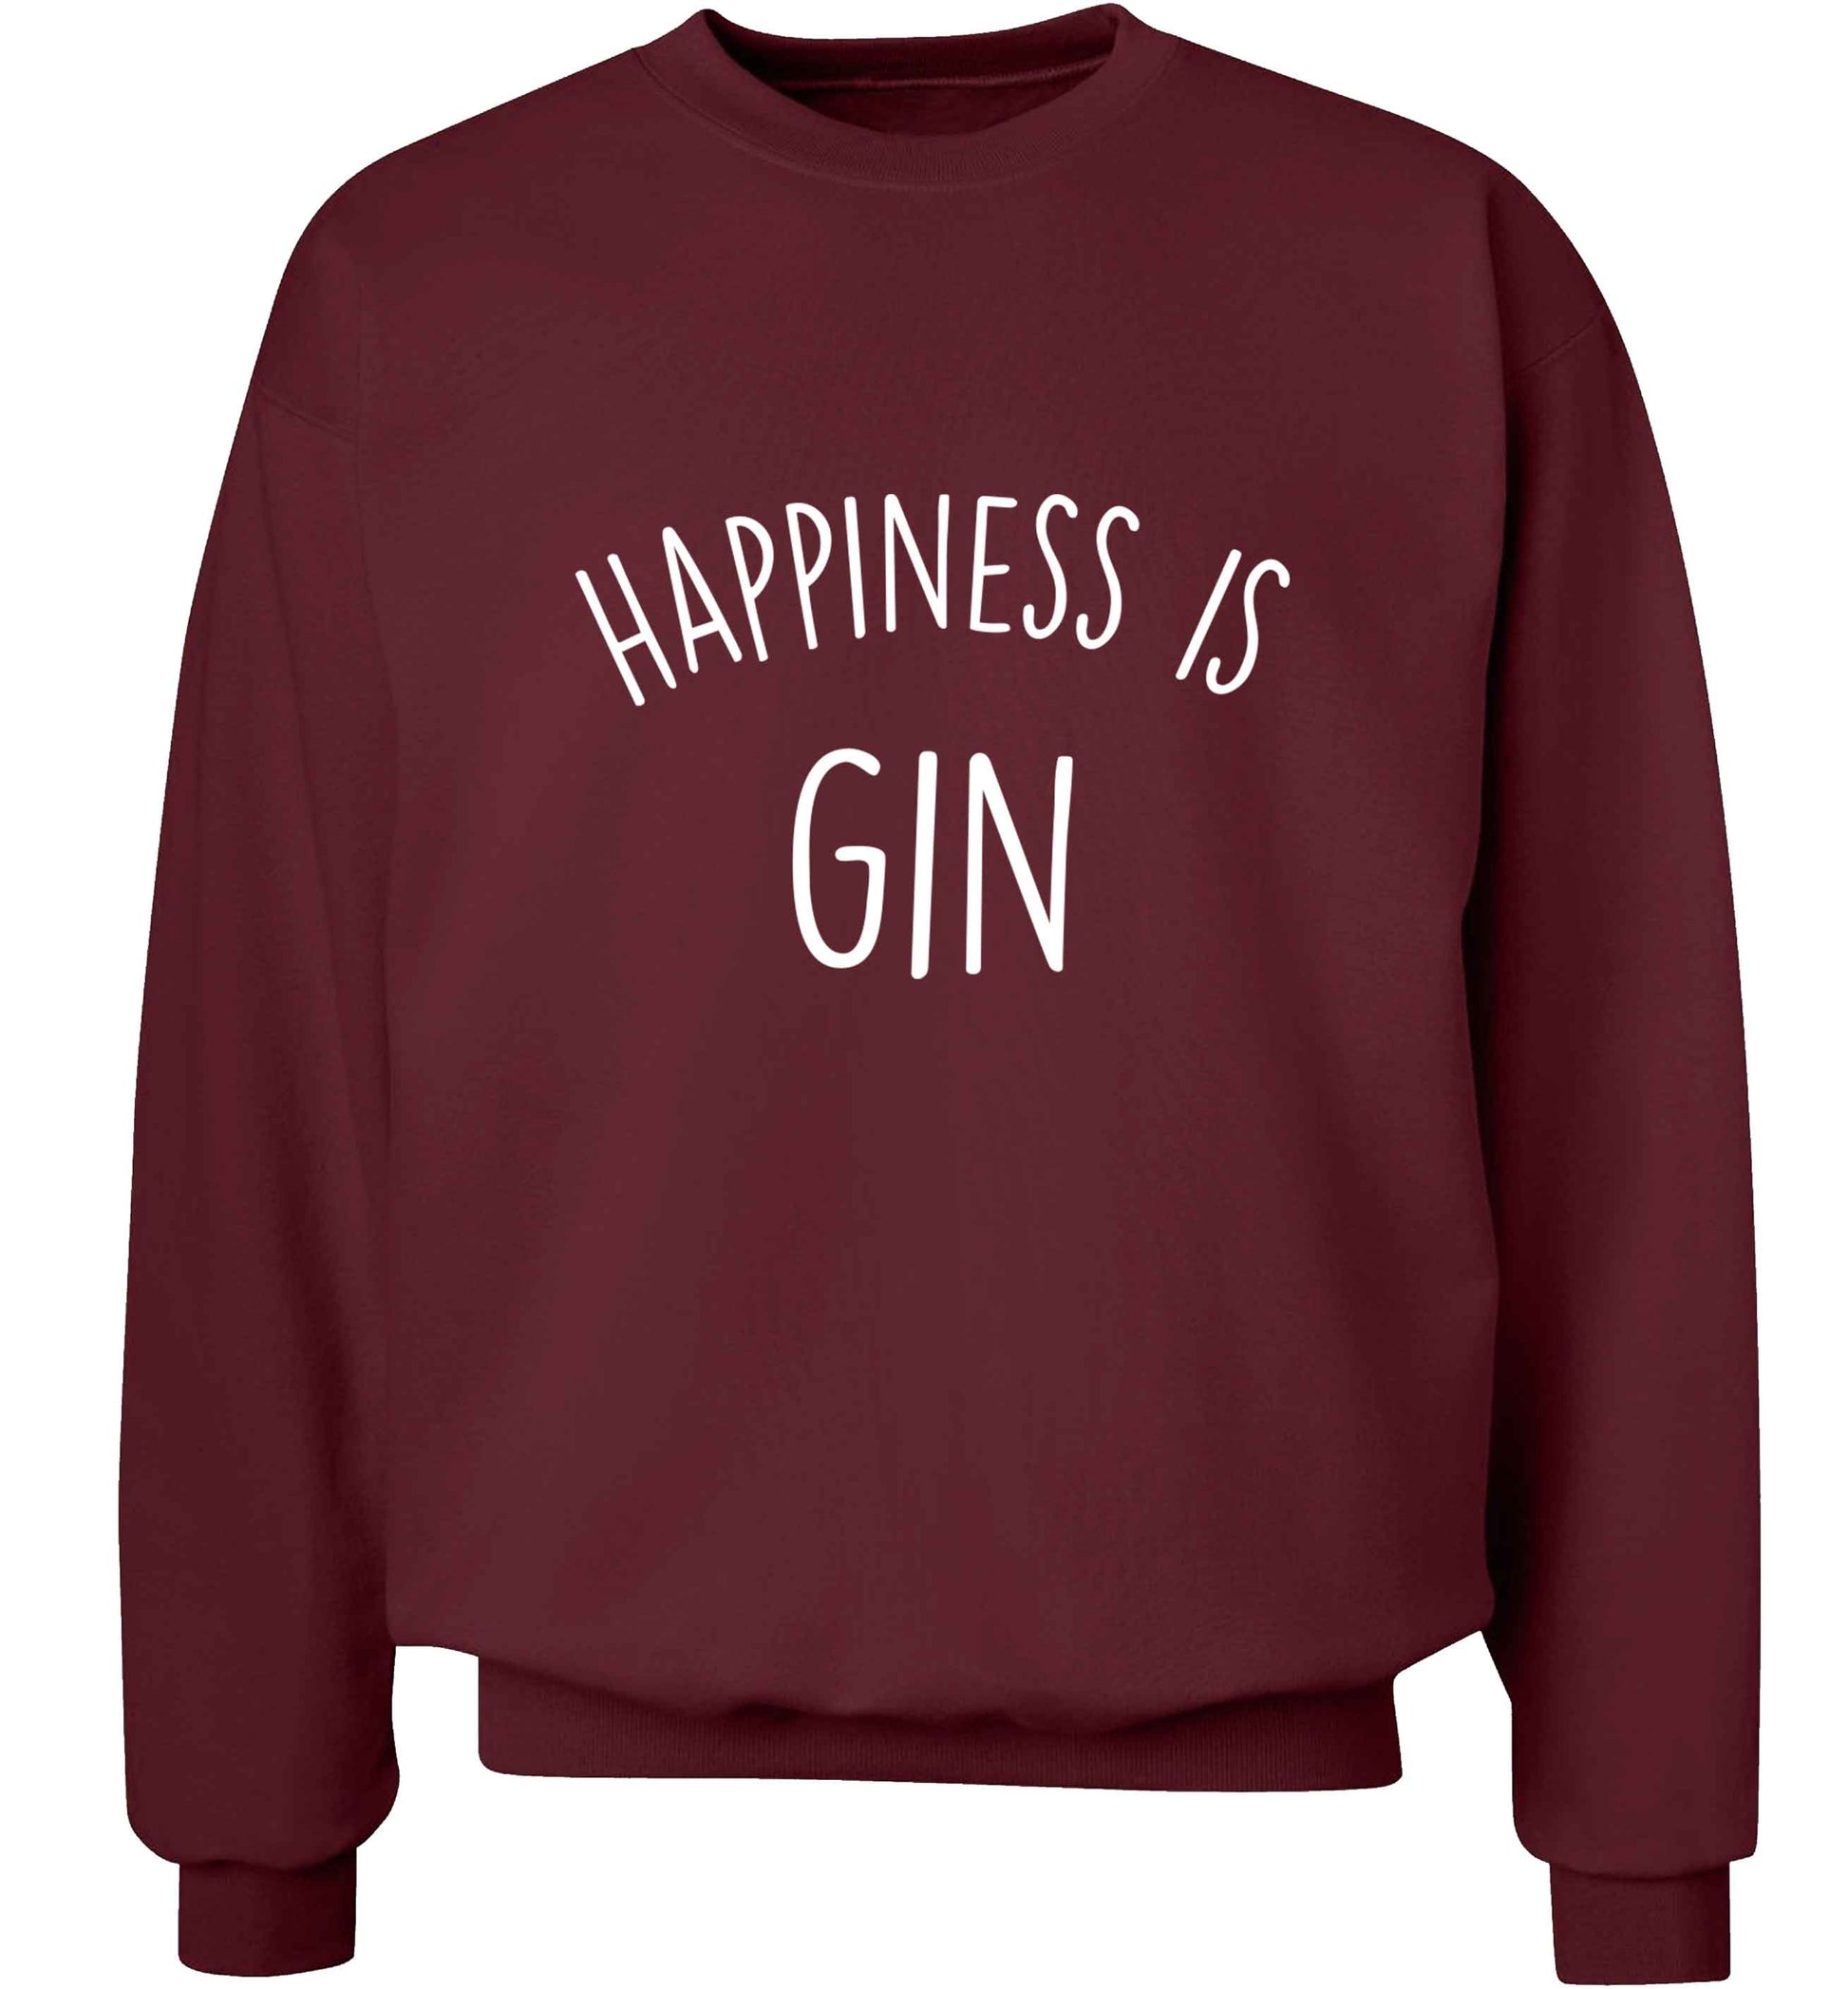 Happiness is gin adult's unisex maroon sweater 2XL